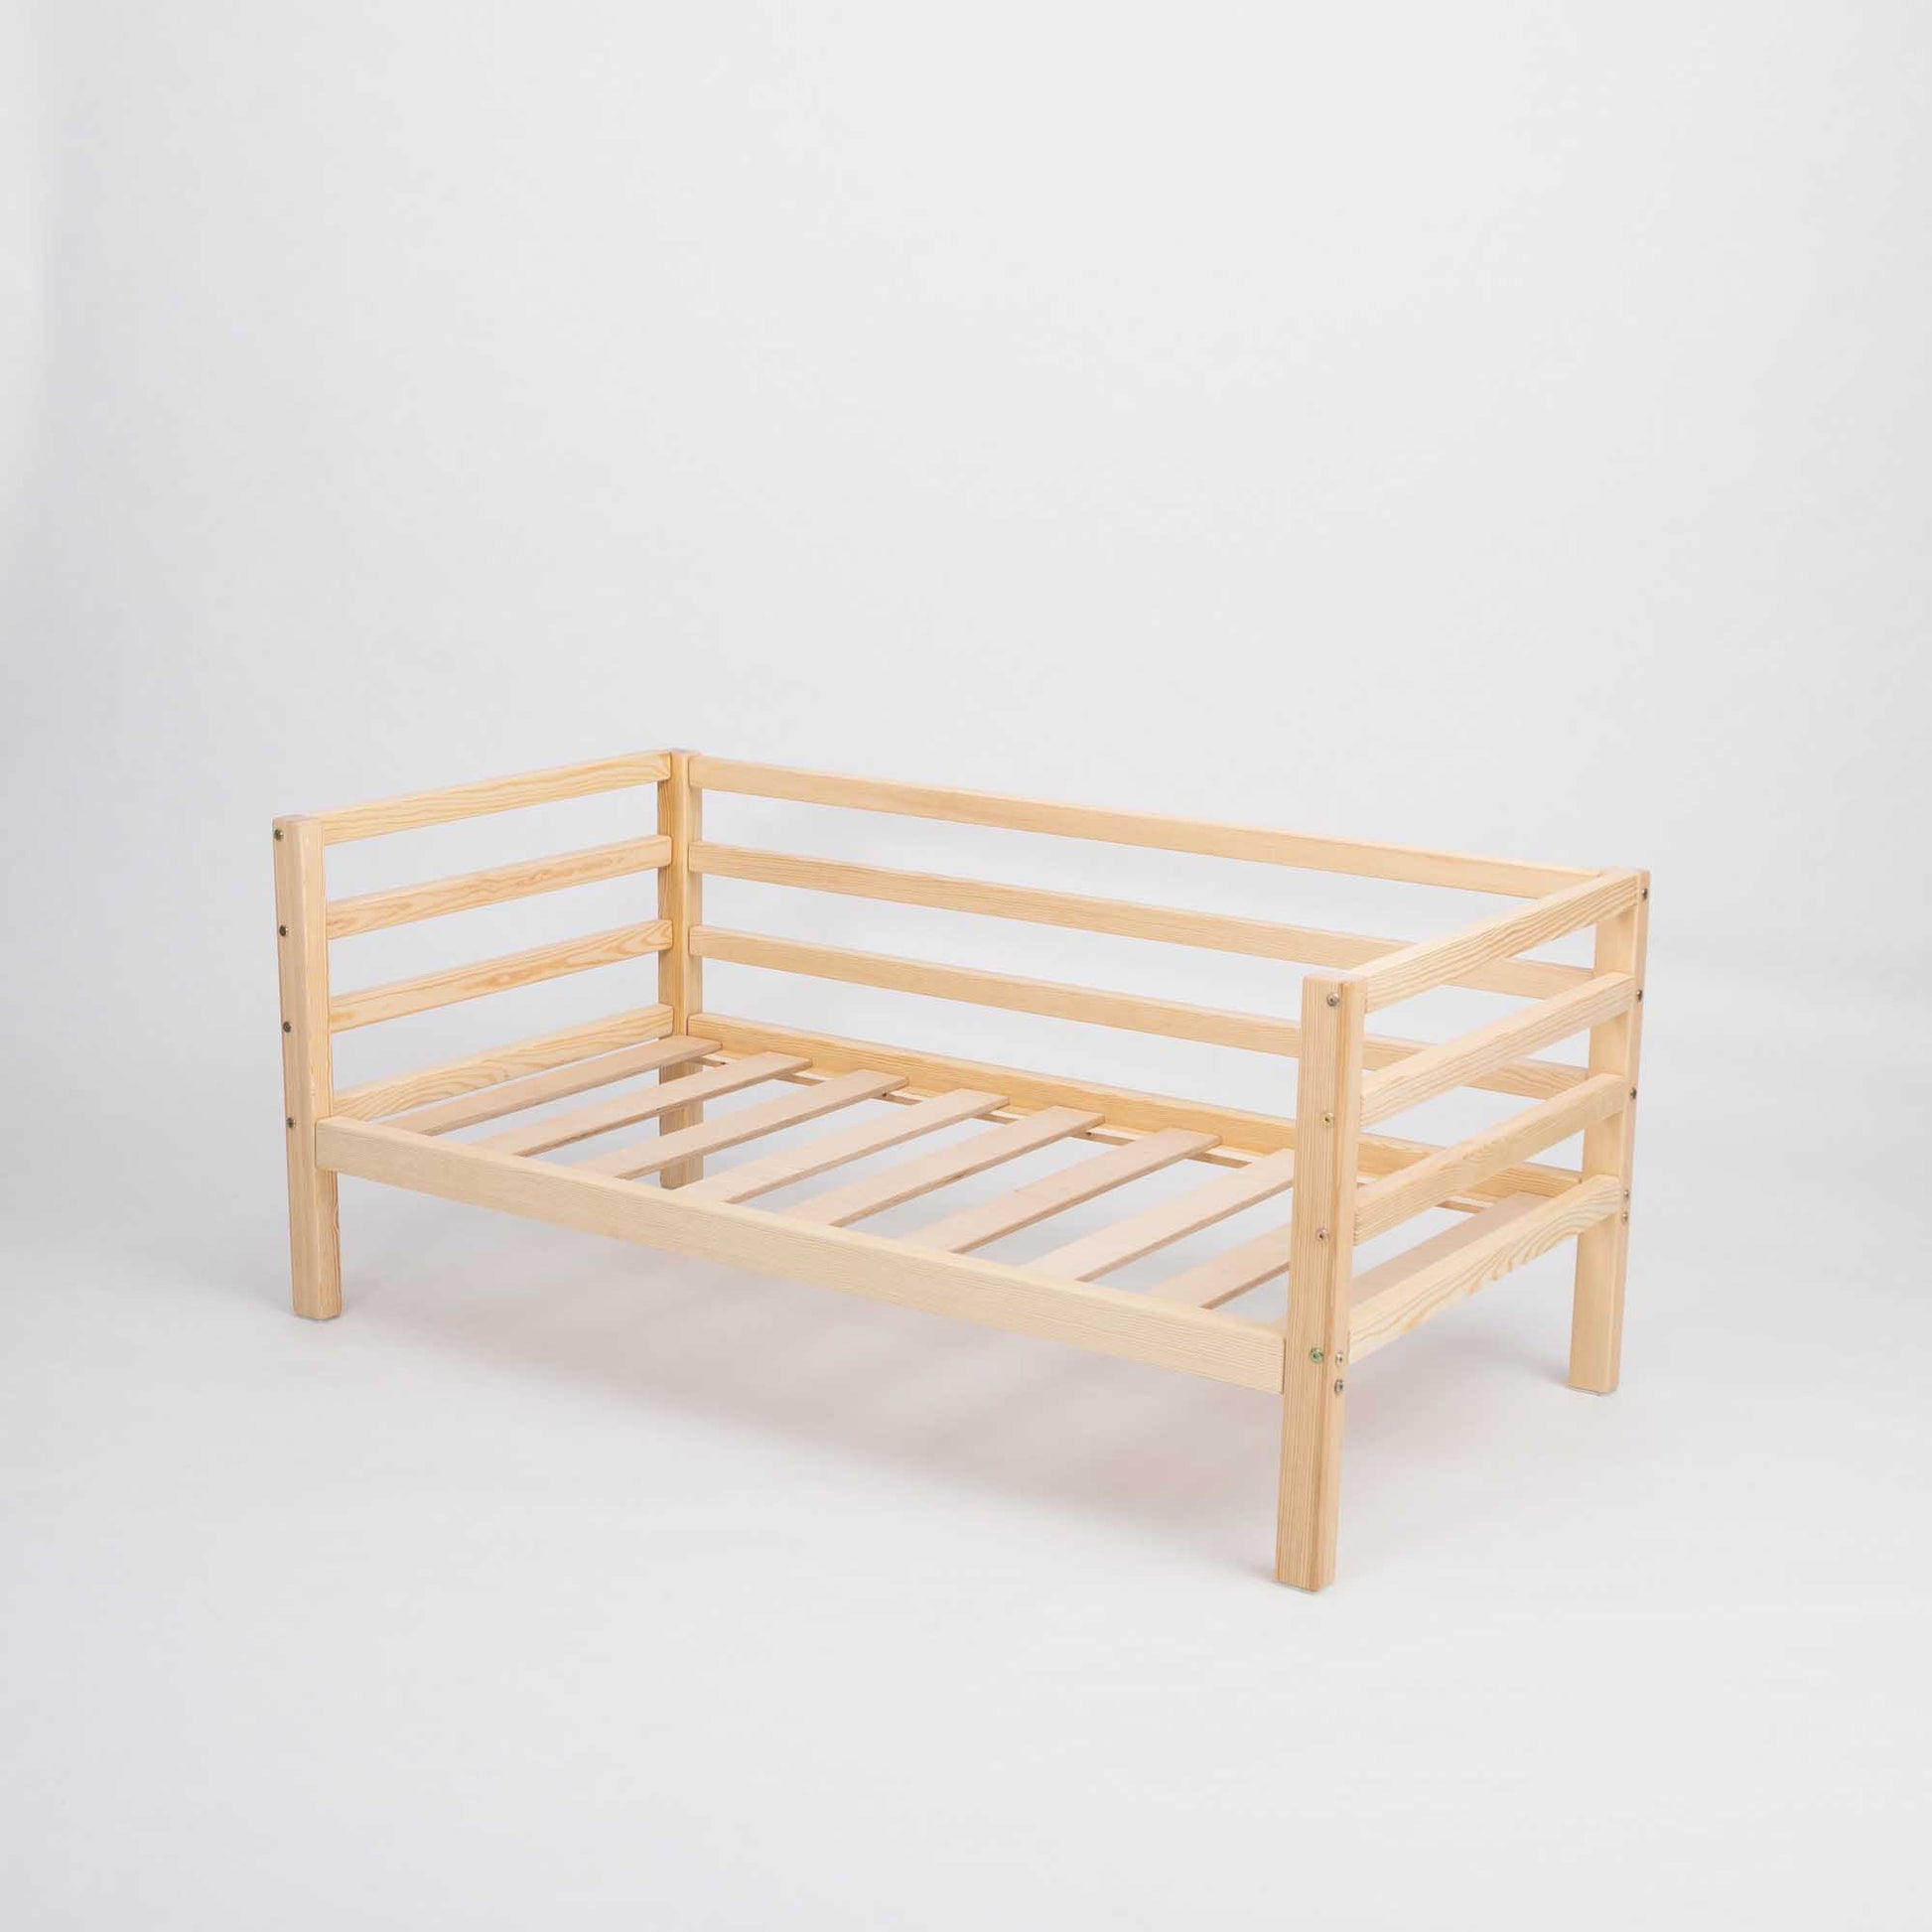 A Sweet Home From Wood kids' bed on legs with a 3-sided horizontal rail that grows with your child, featuring slats on a white background.